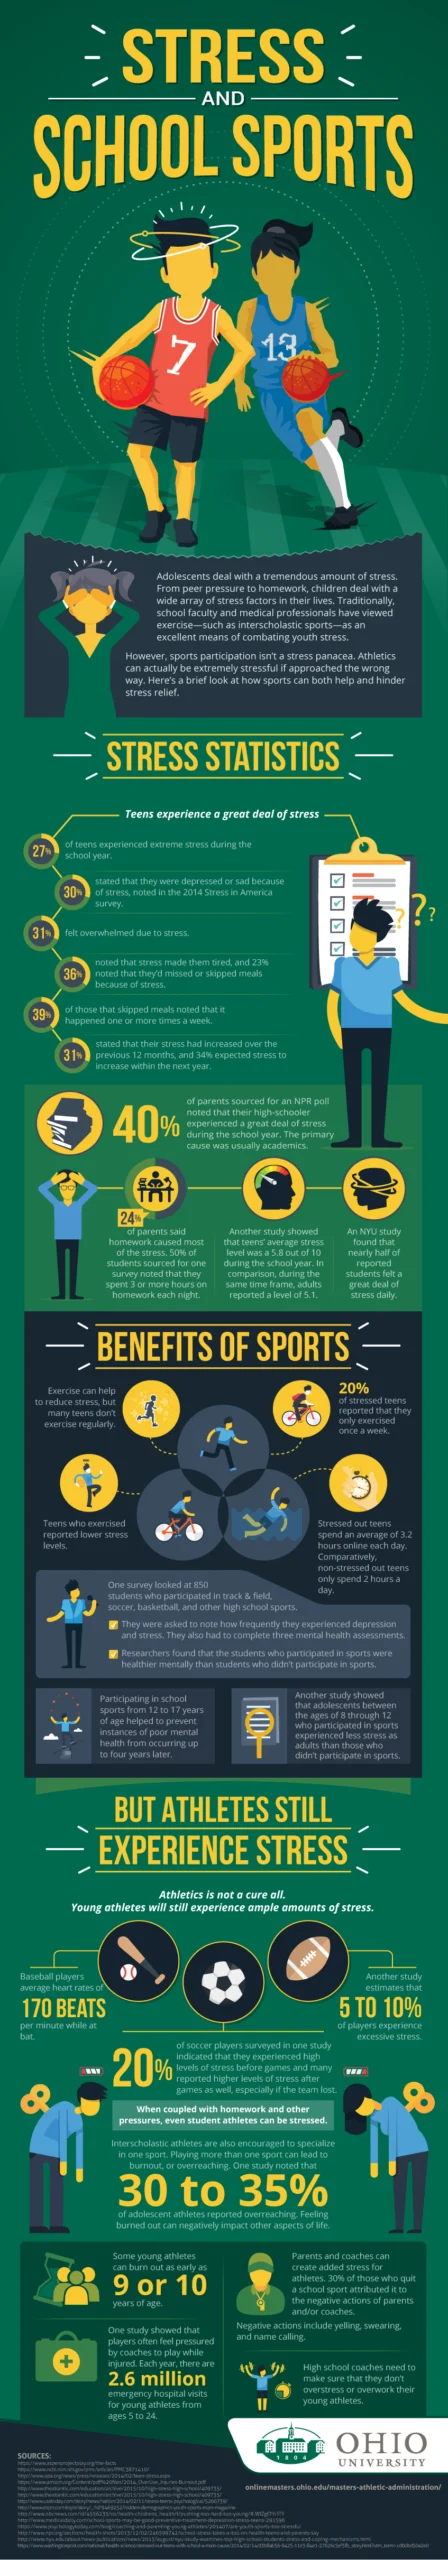 Stress And School Sports (InfoGraphic)